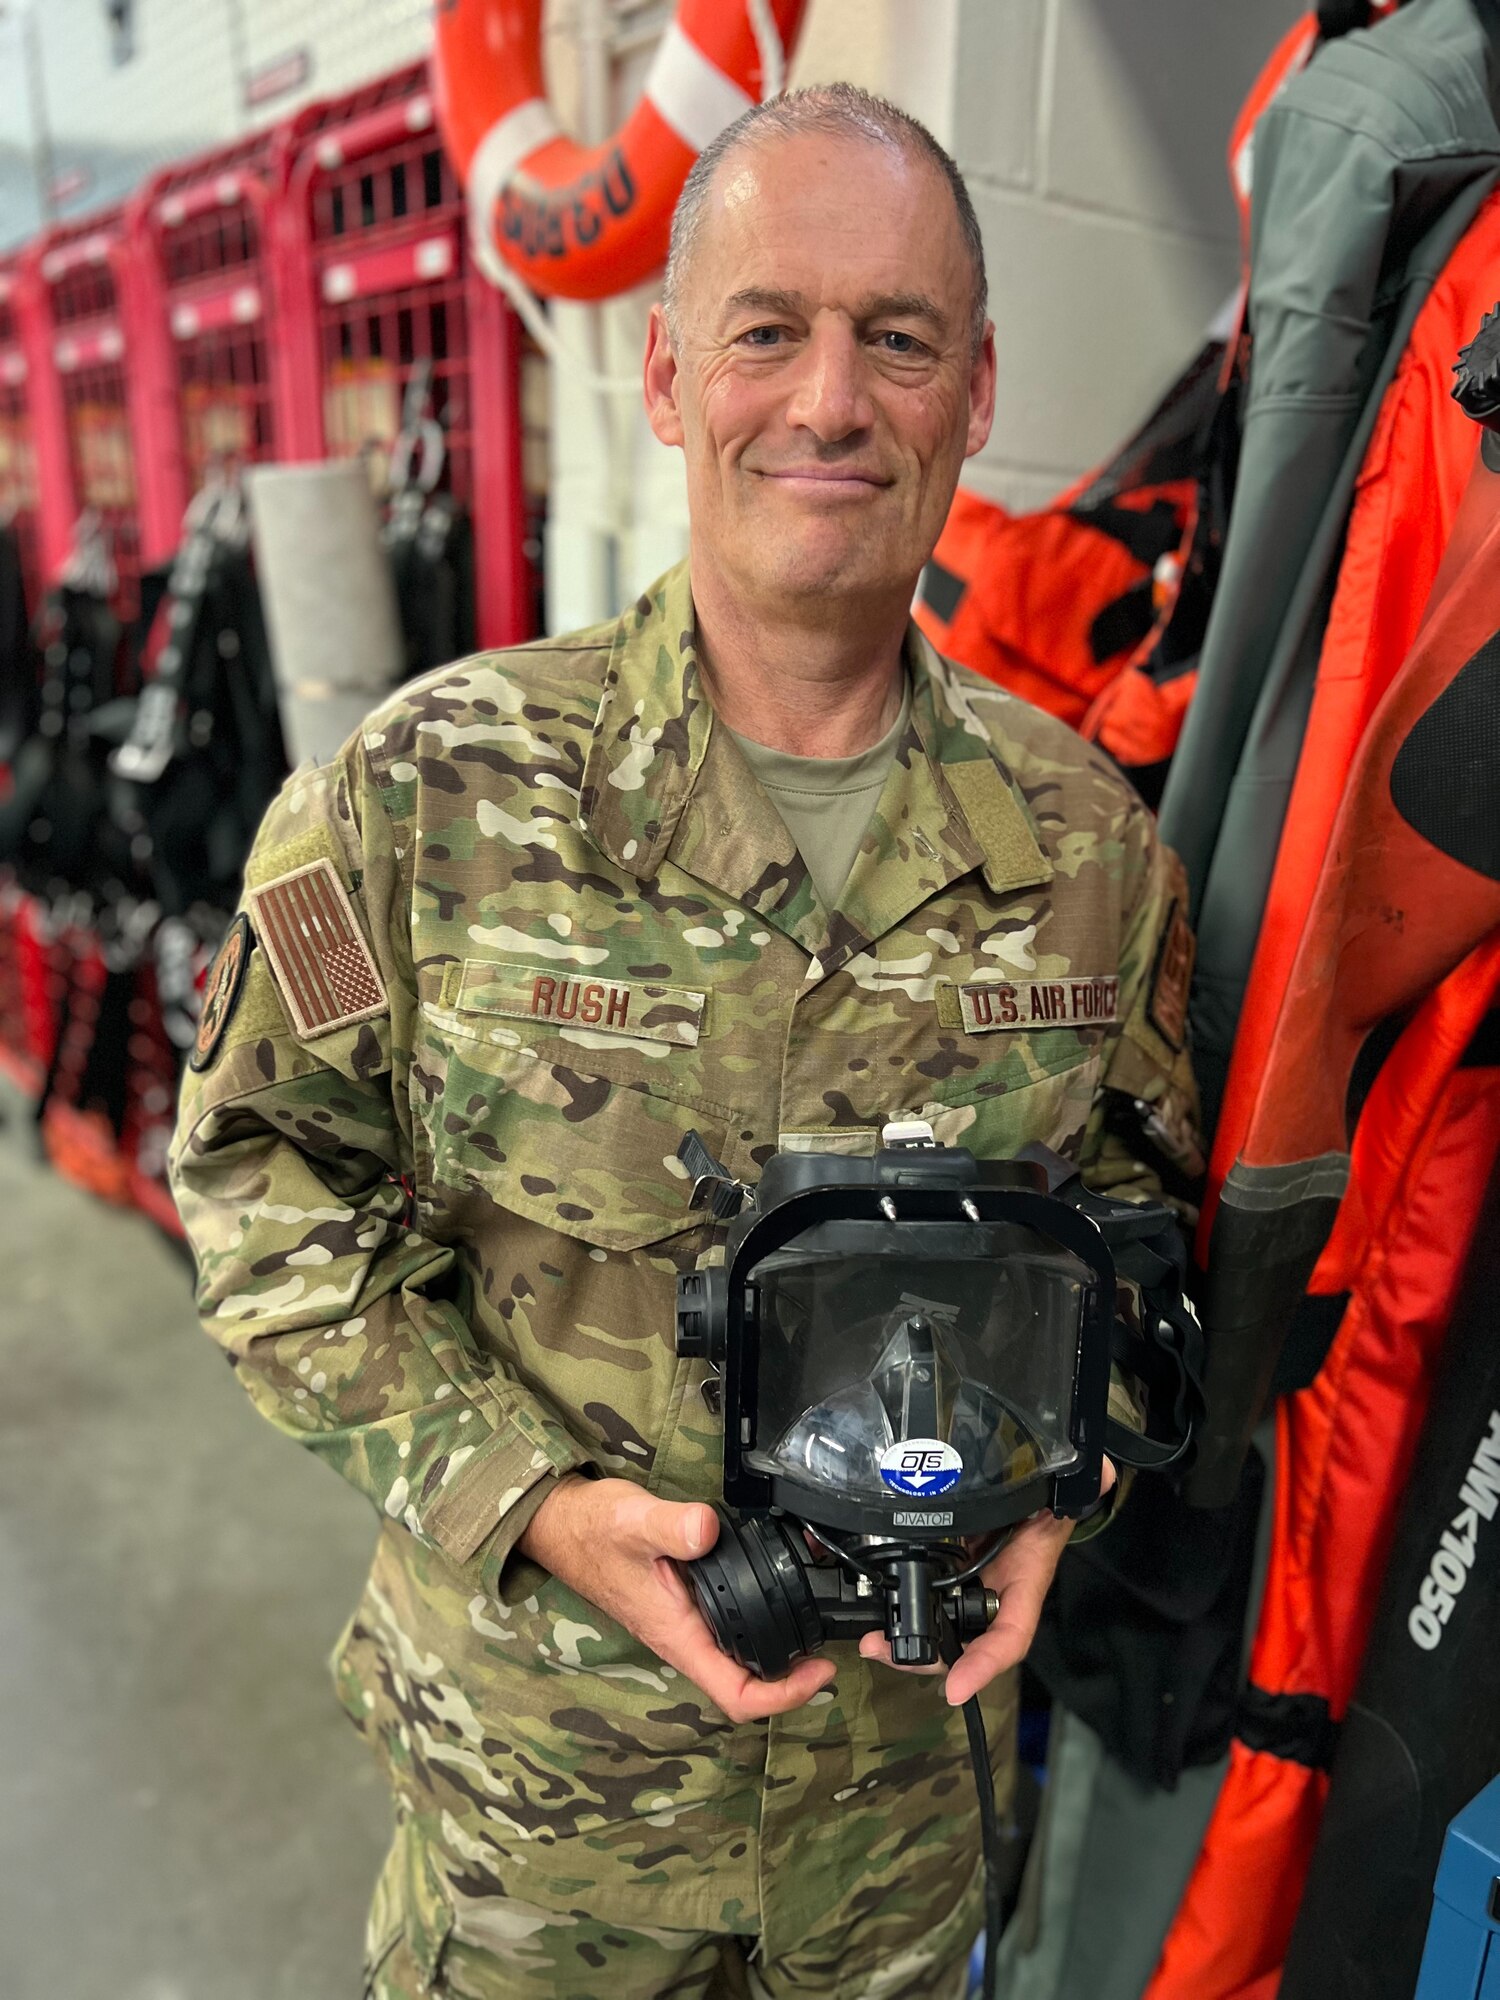 U.S. Air Force Lt. Col. Stephen "Doc" Rush, medical group commander for the 106th Rescue Wing  who took part as a medical advisor in the 2018 Thai Cave rescue pictured here in the 103rd Rescue Squadron dive locker at F.S. Gabreski Air National Guard Base, Westhampton Beach, N.Y. on Aug. 11, 2022 (U.S. Air National Guard photo by Maj. Michael O'Hagan)